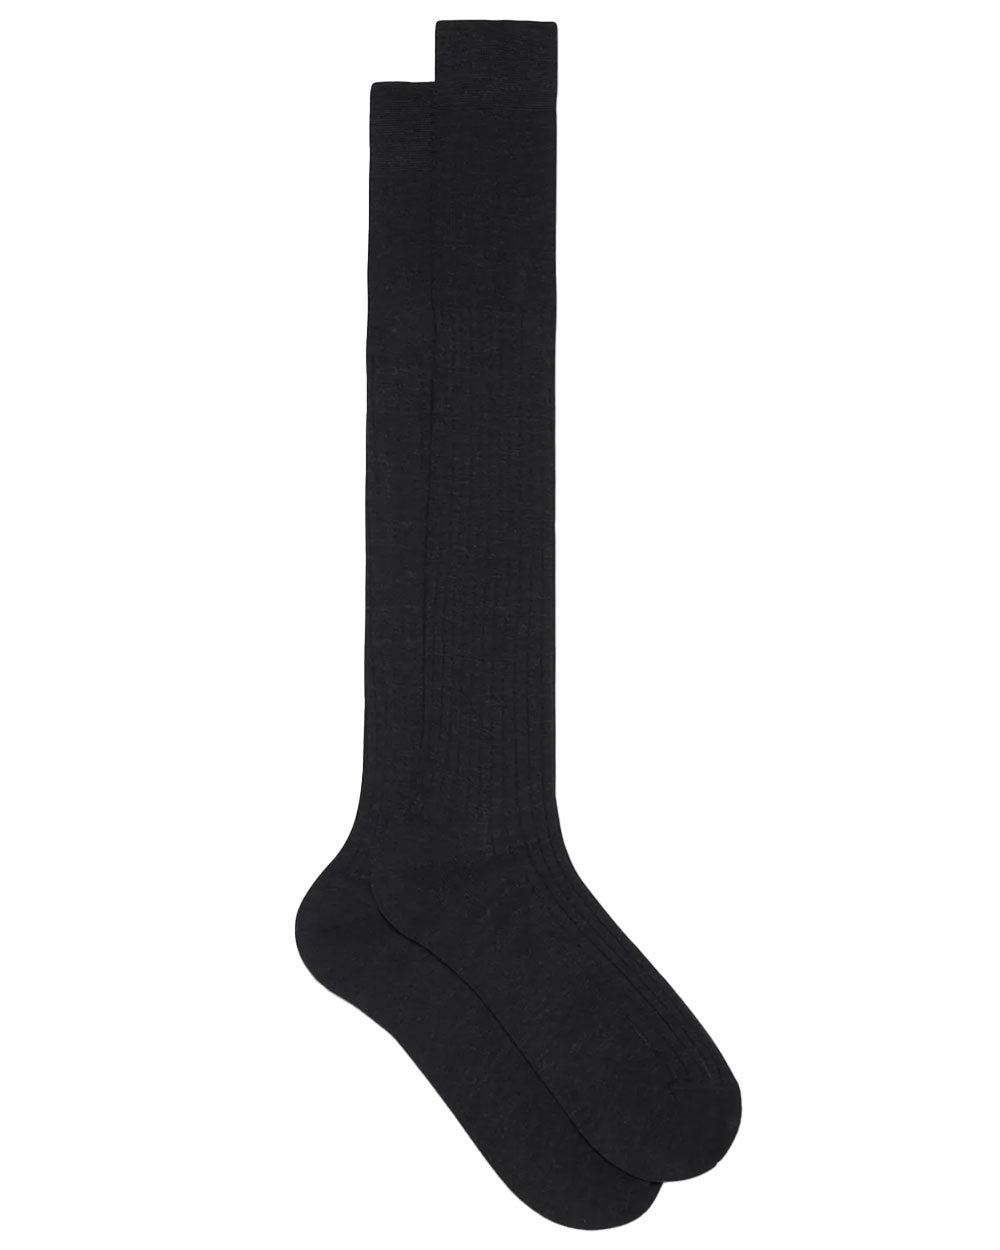 Wool Basic Over the Calf Socks in Anthracite